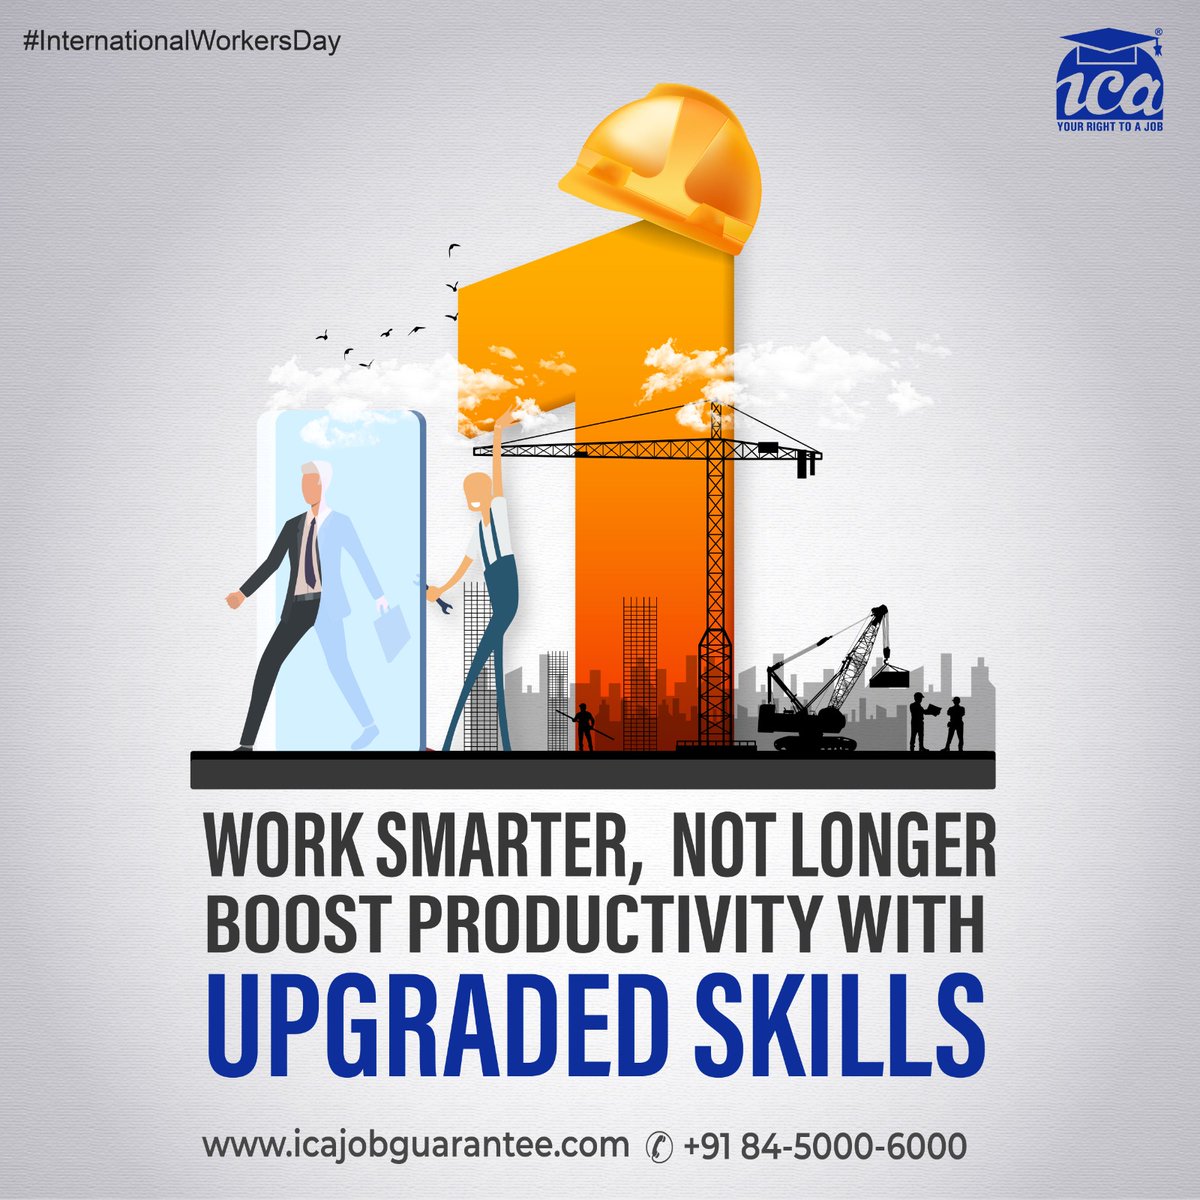 Upgrade your skills this International Workers' Day for smarter, more efficient work! 
.
.
.
#ICAEduSkills #IAmJobReady #LearnWithICA #ICAJobGuaranteeCourse #JobReadyCourses #mayday #labourday #internationalworkersday #hardwork #smartwork #1stmay #skillsmatter